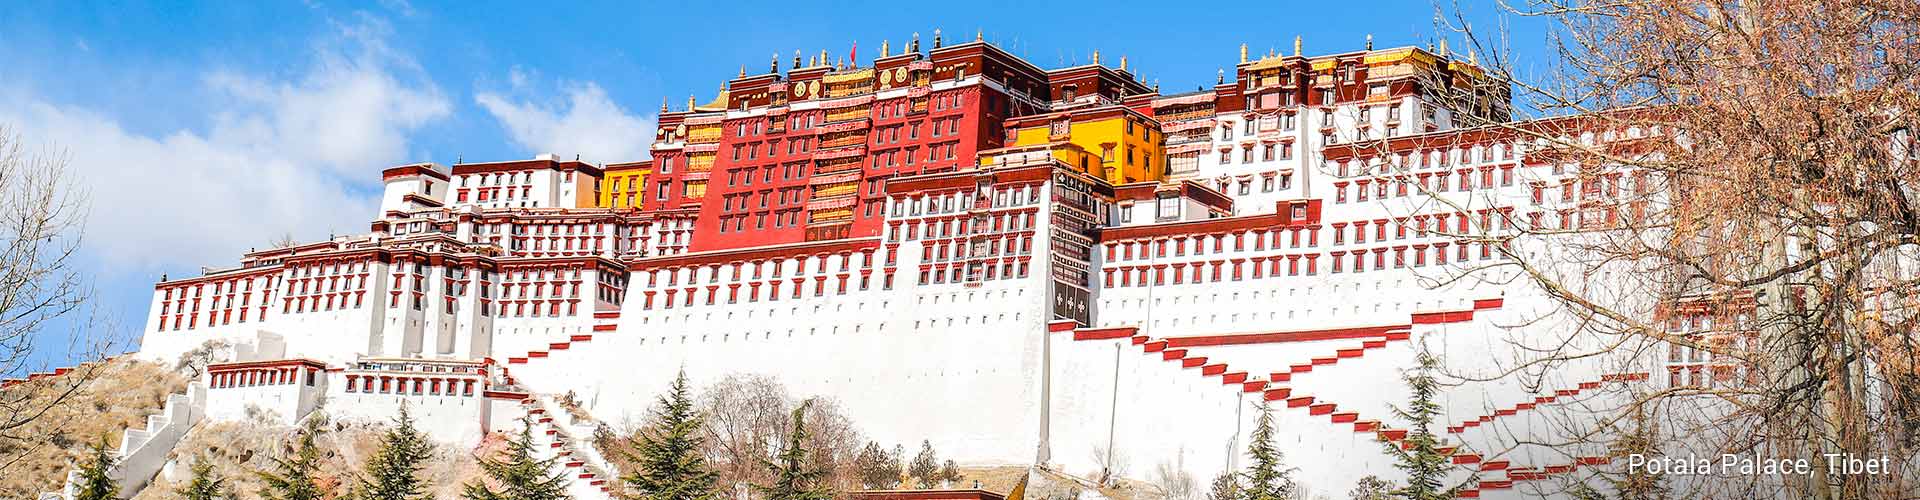 Take our 6 best China Nepal Tibet Tours to visit China Tibet Nepal in one trip. Start from China to Tibet and Nepal, or explore from Nepal to Gyirong Border to Tibet and China.